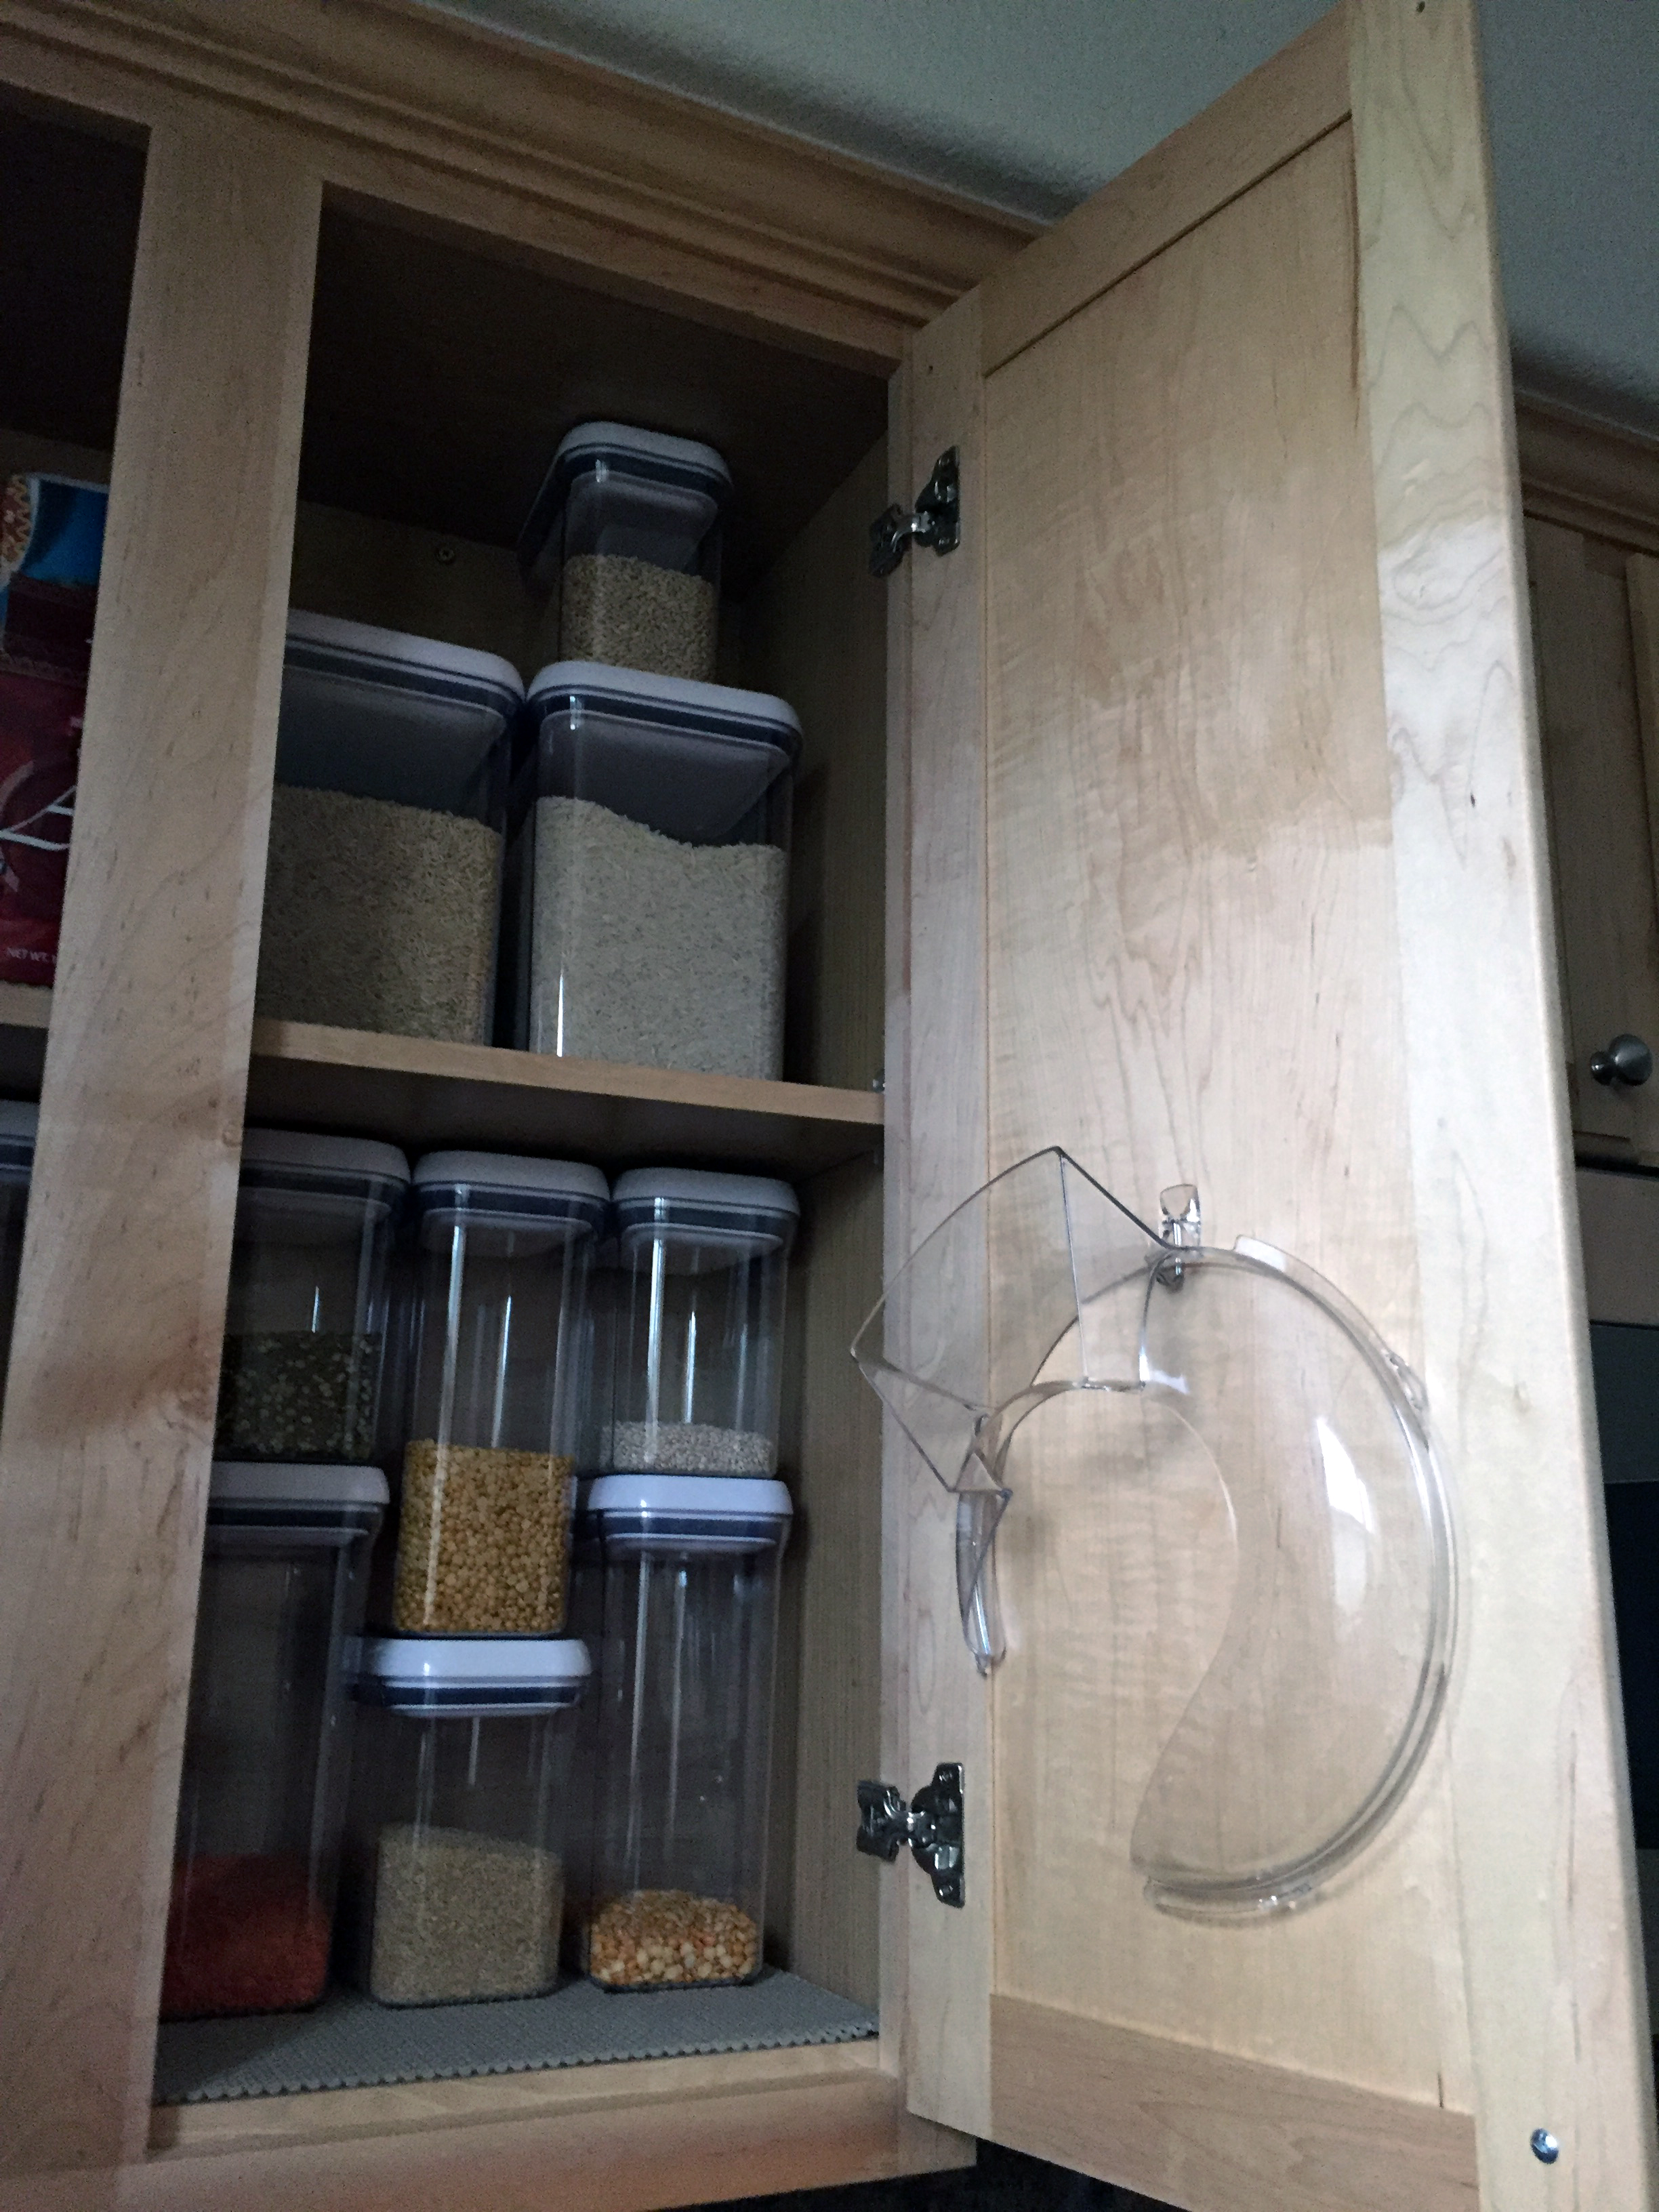 KitchenAid Accessory Organization on inside of cabinet with splash cover accessory